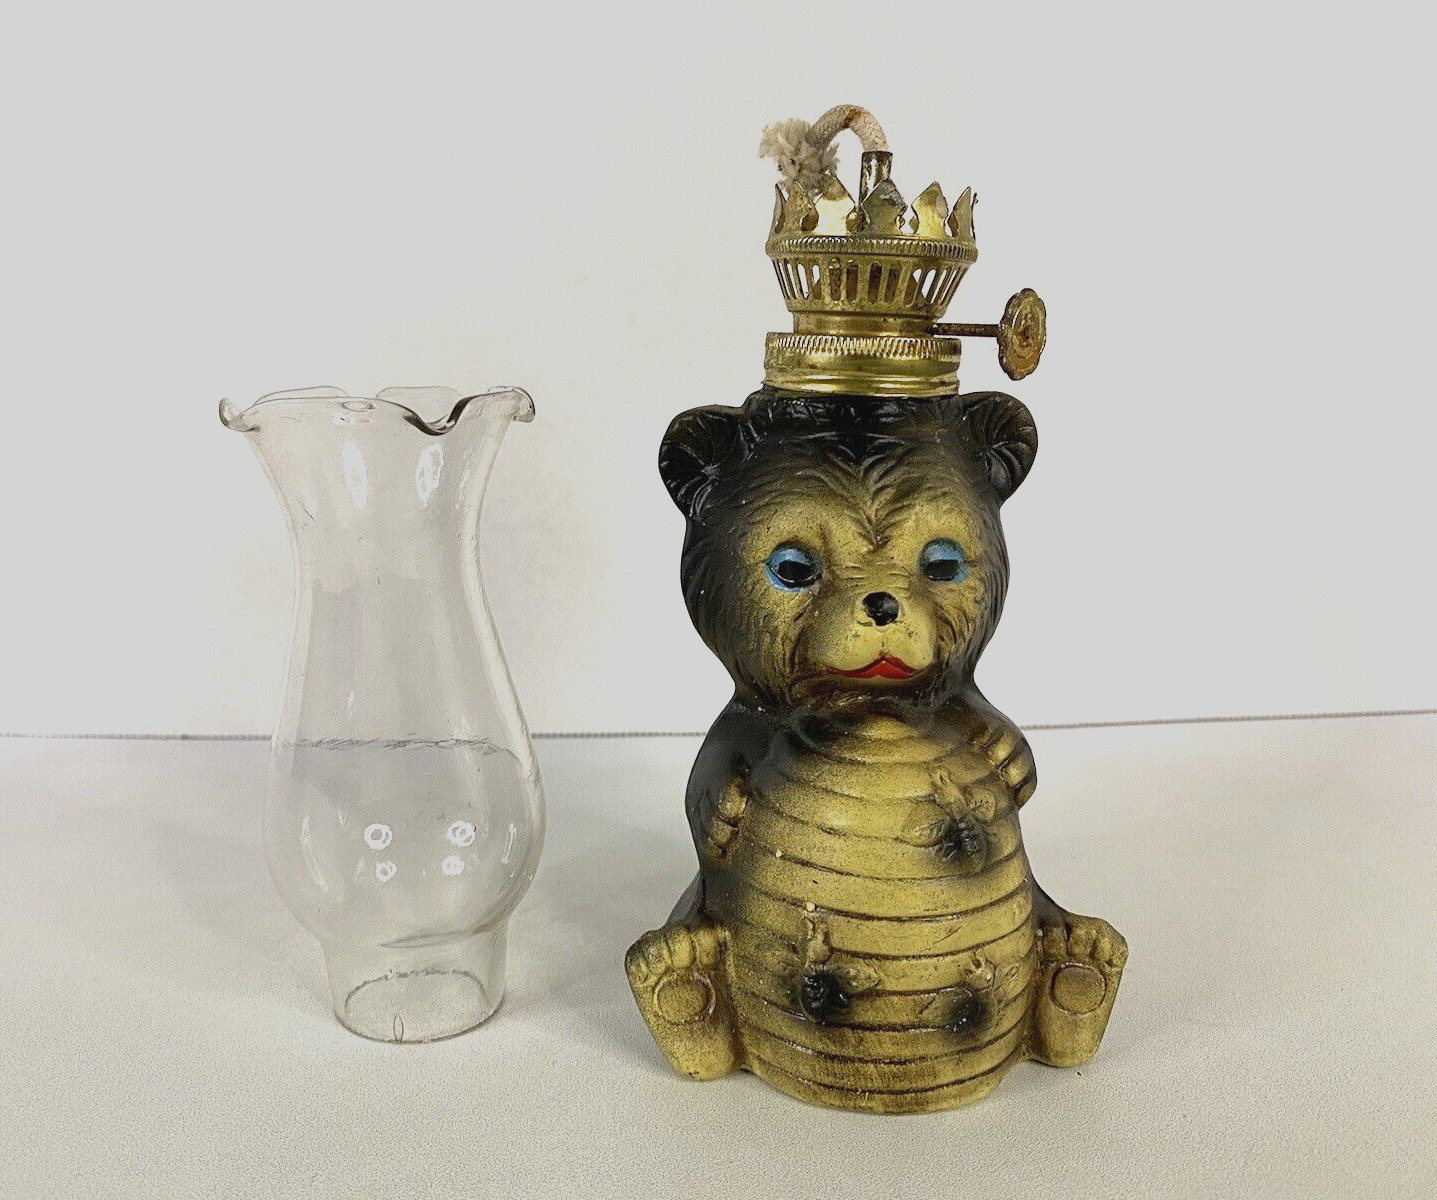 VTG 1950s BEAR HOLDING BEEHIVE Oil Lamp Light Made In Japan Very Cute & Clean